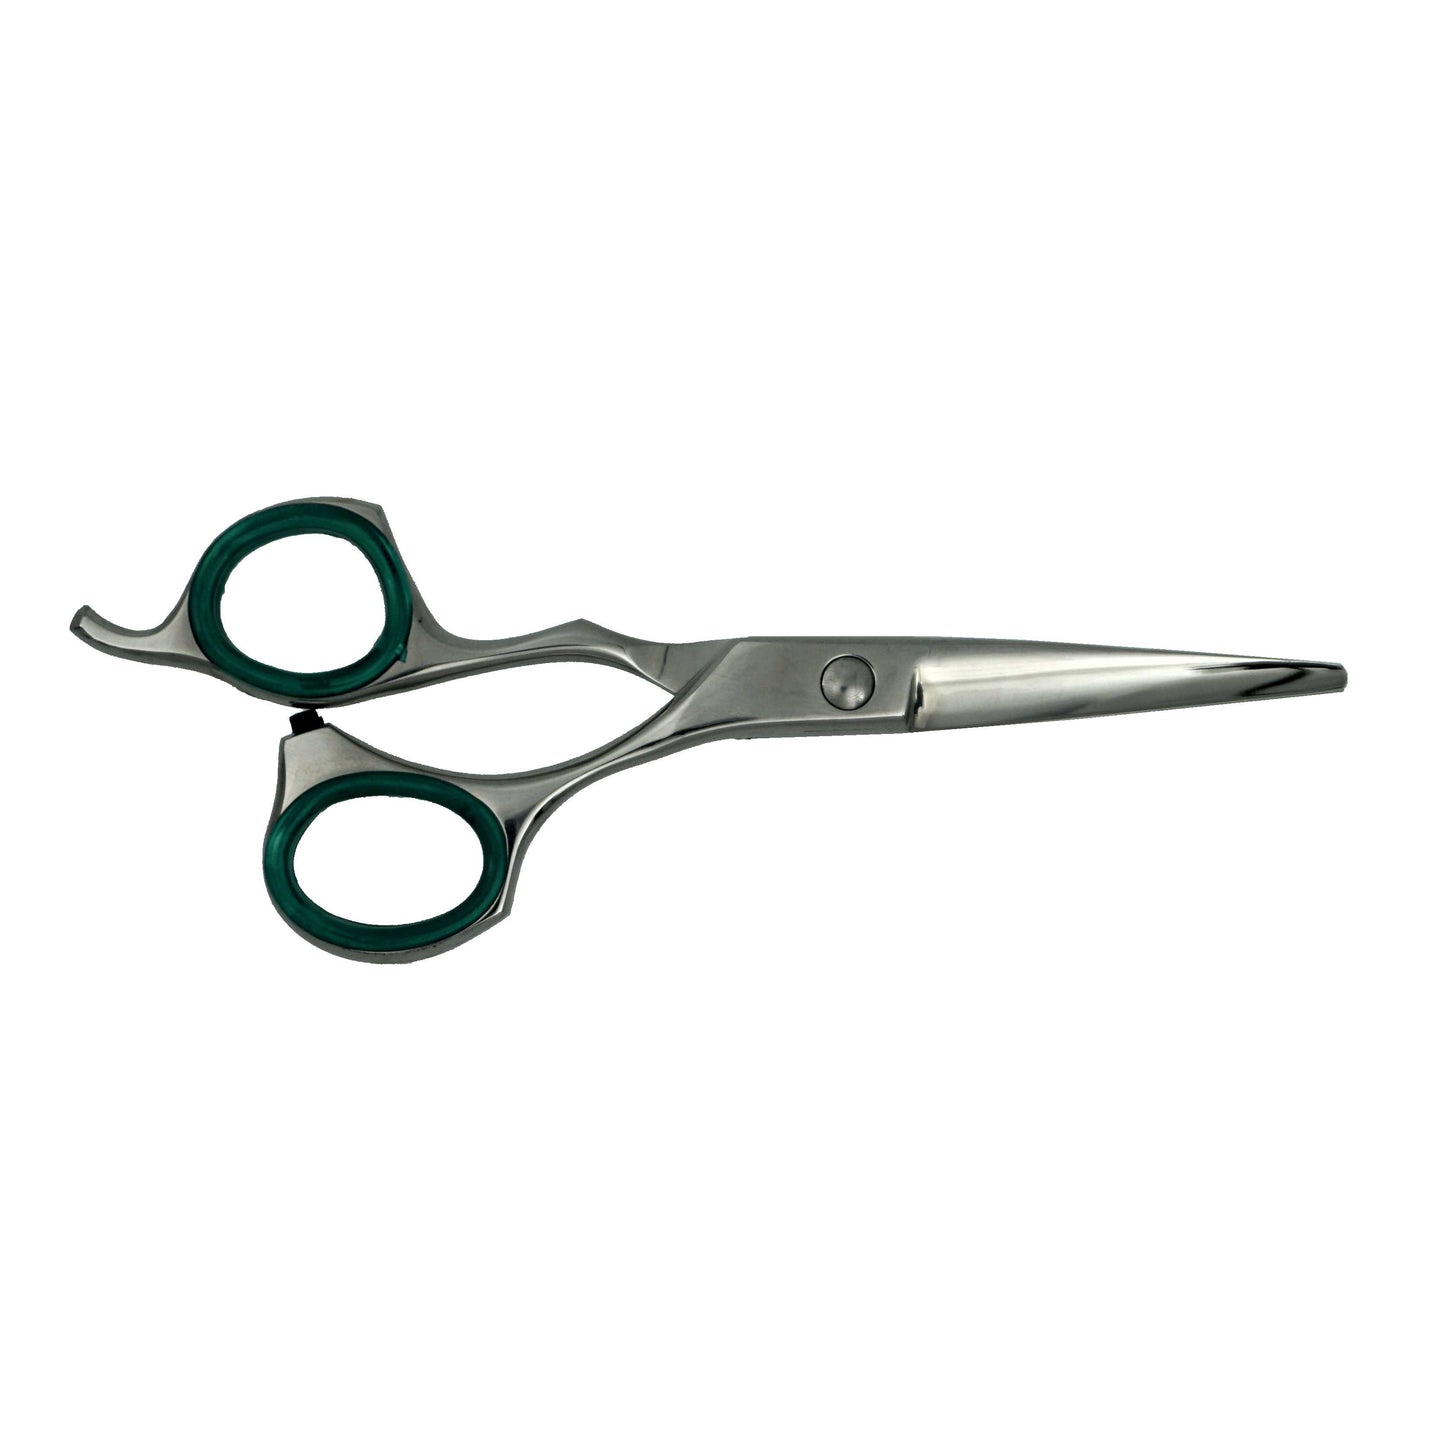 5.5" Right Handed, Stainless Steel Professional Shear, Fixed Finger Rest